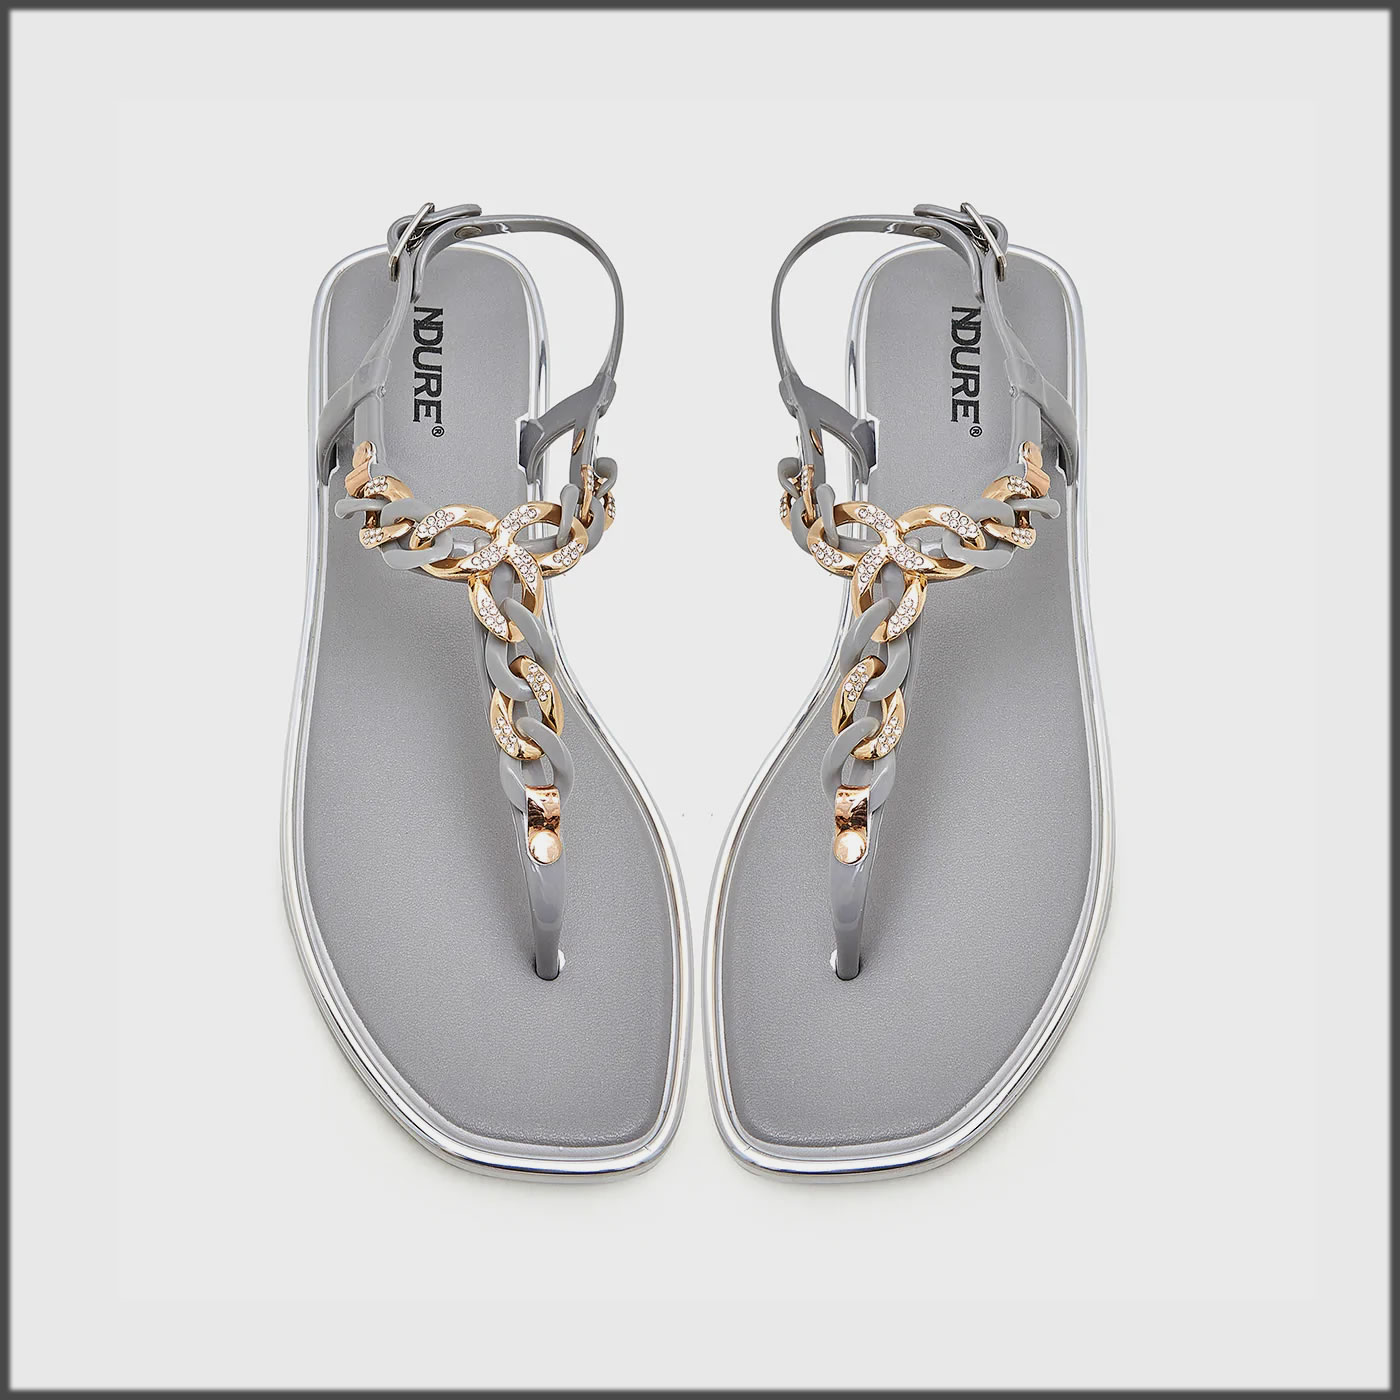 Chain Embellished Sandals by Ndure